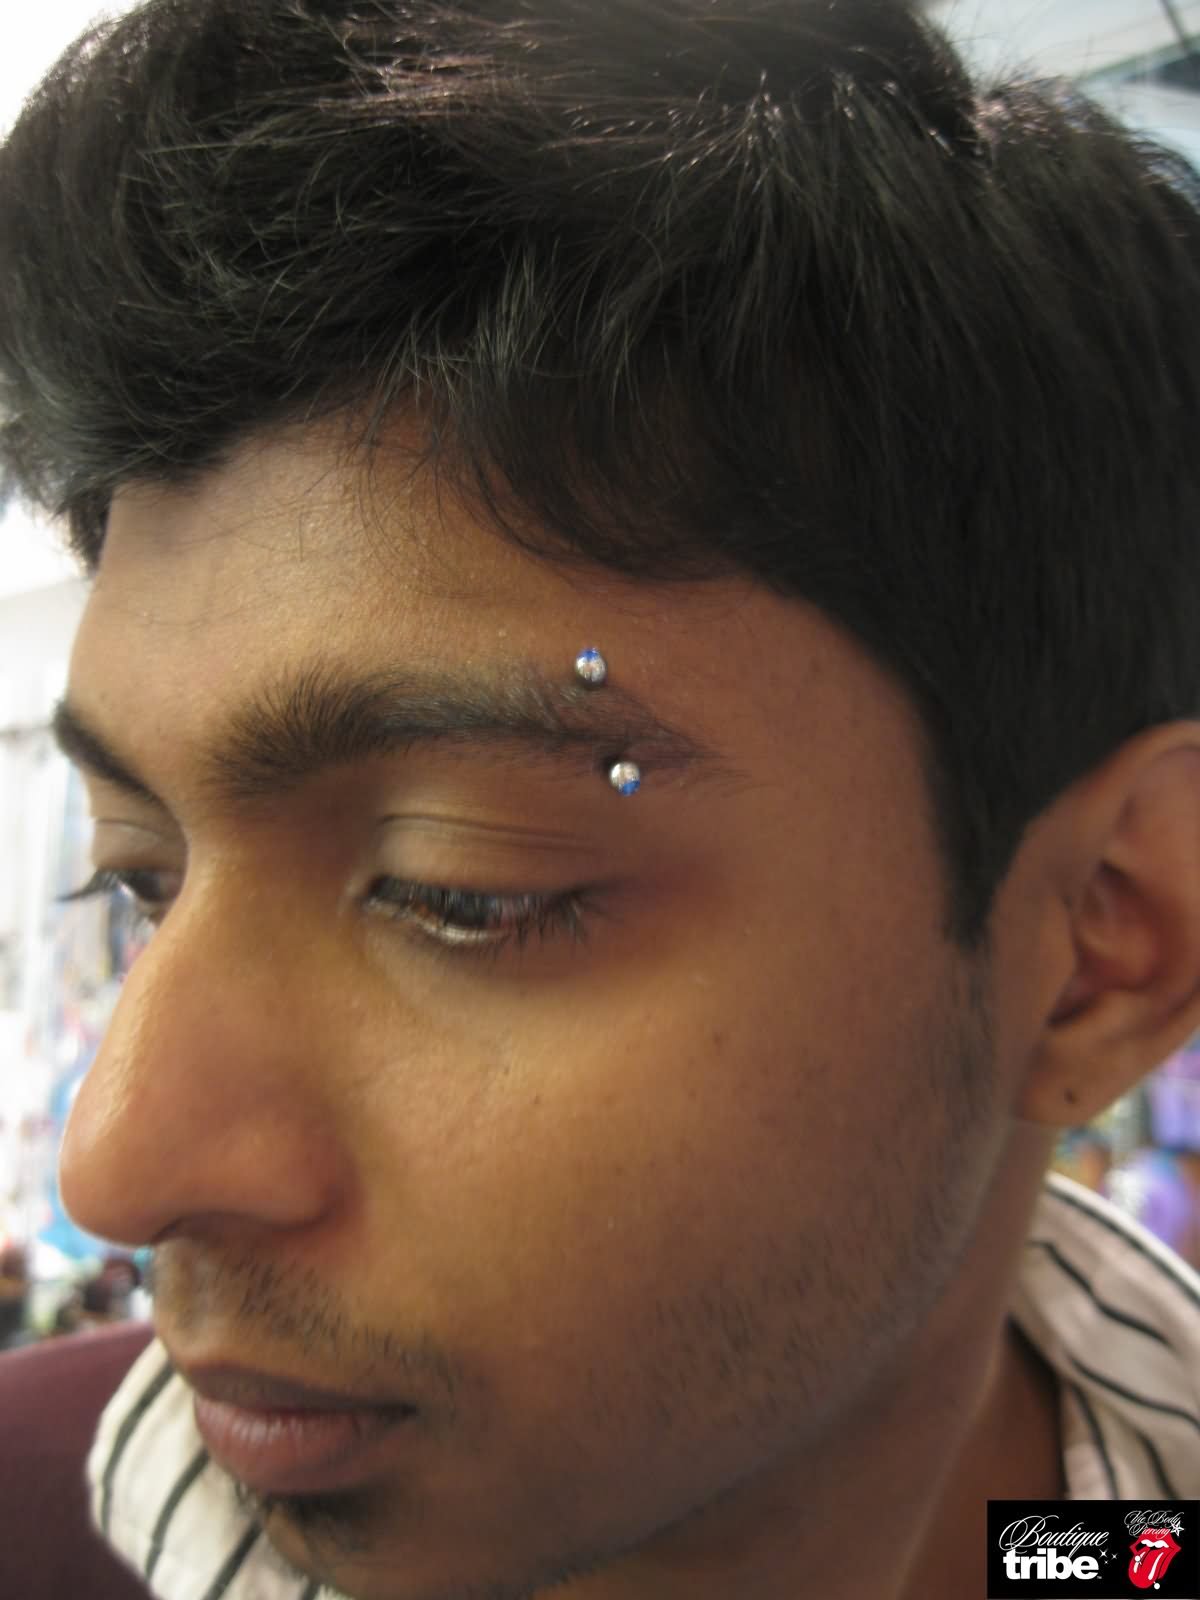 60+ Latest Eyebrow Piercing Pictures Collection